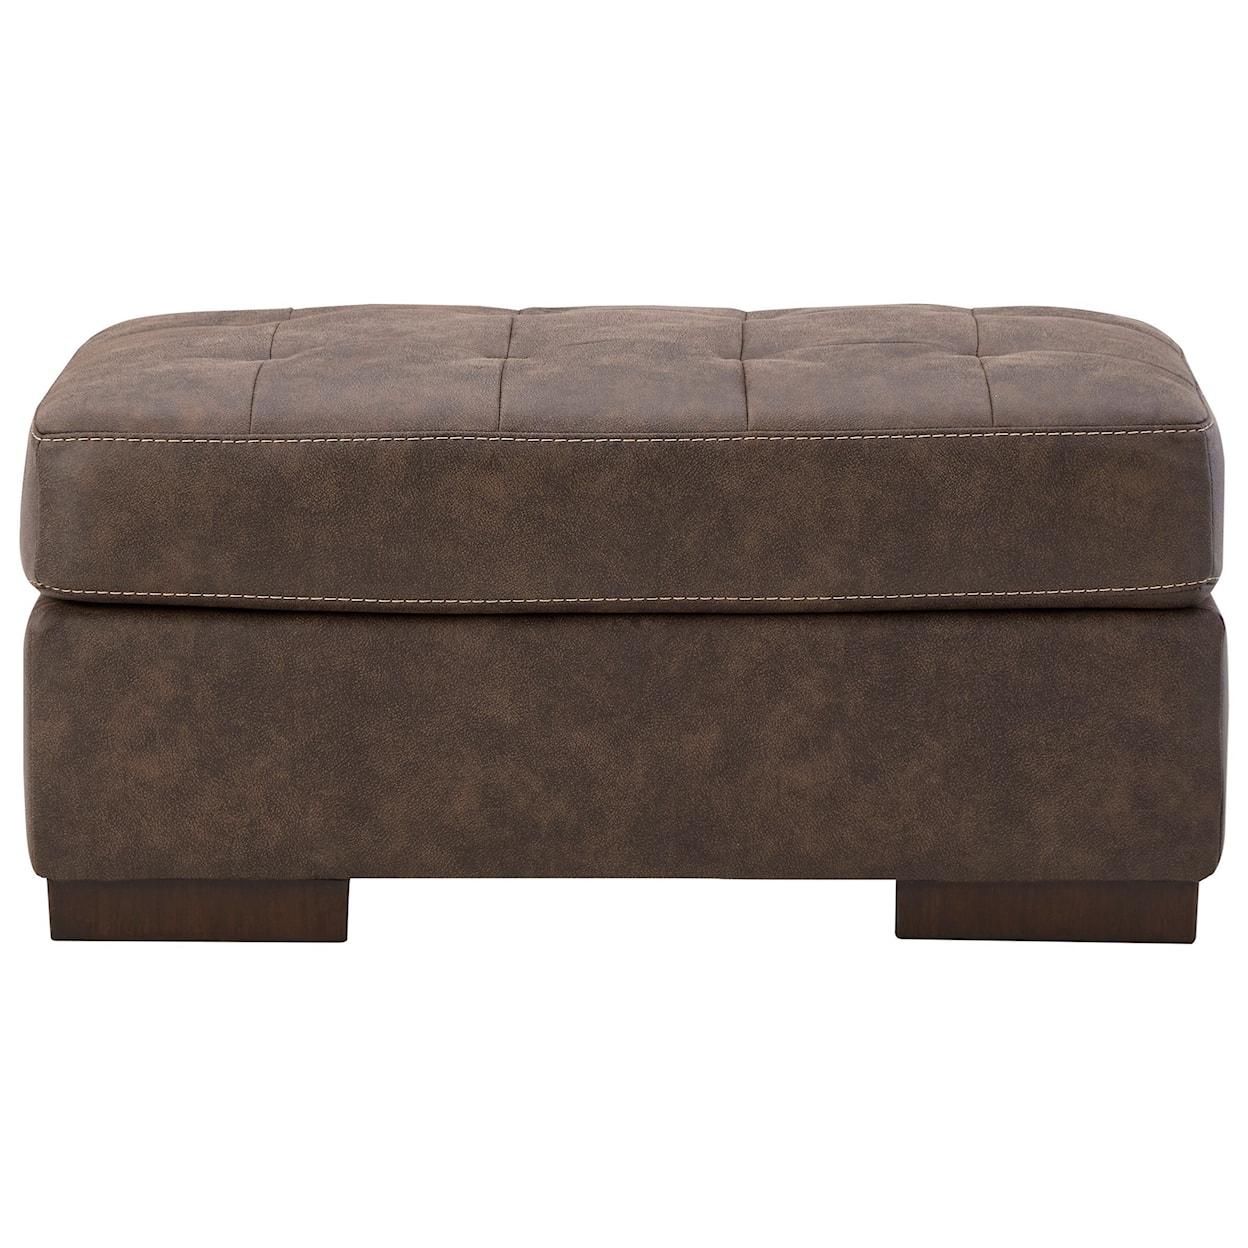 Signature Design by Ashley Maderla Ottoman with Tufted Top